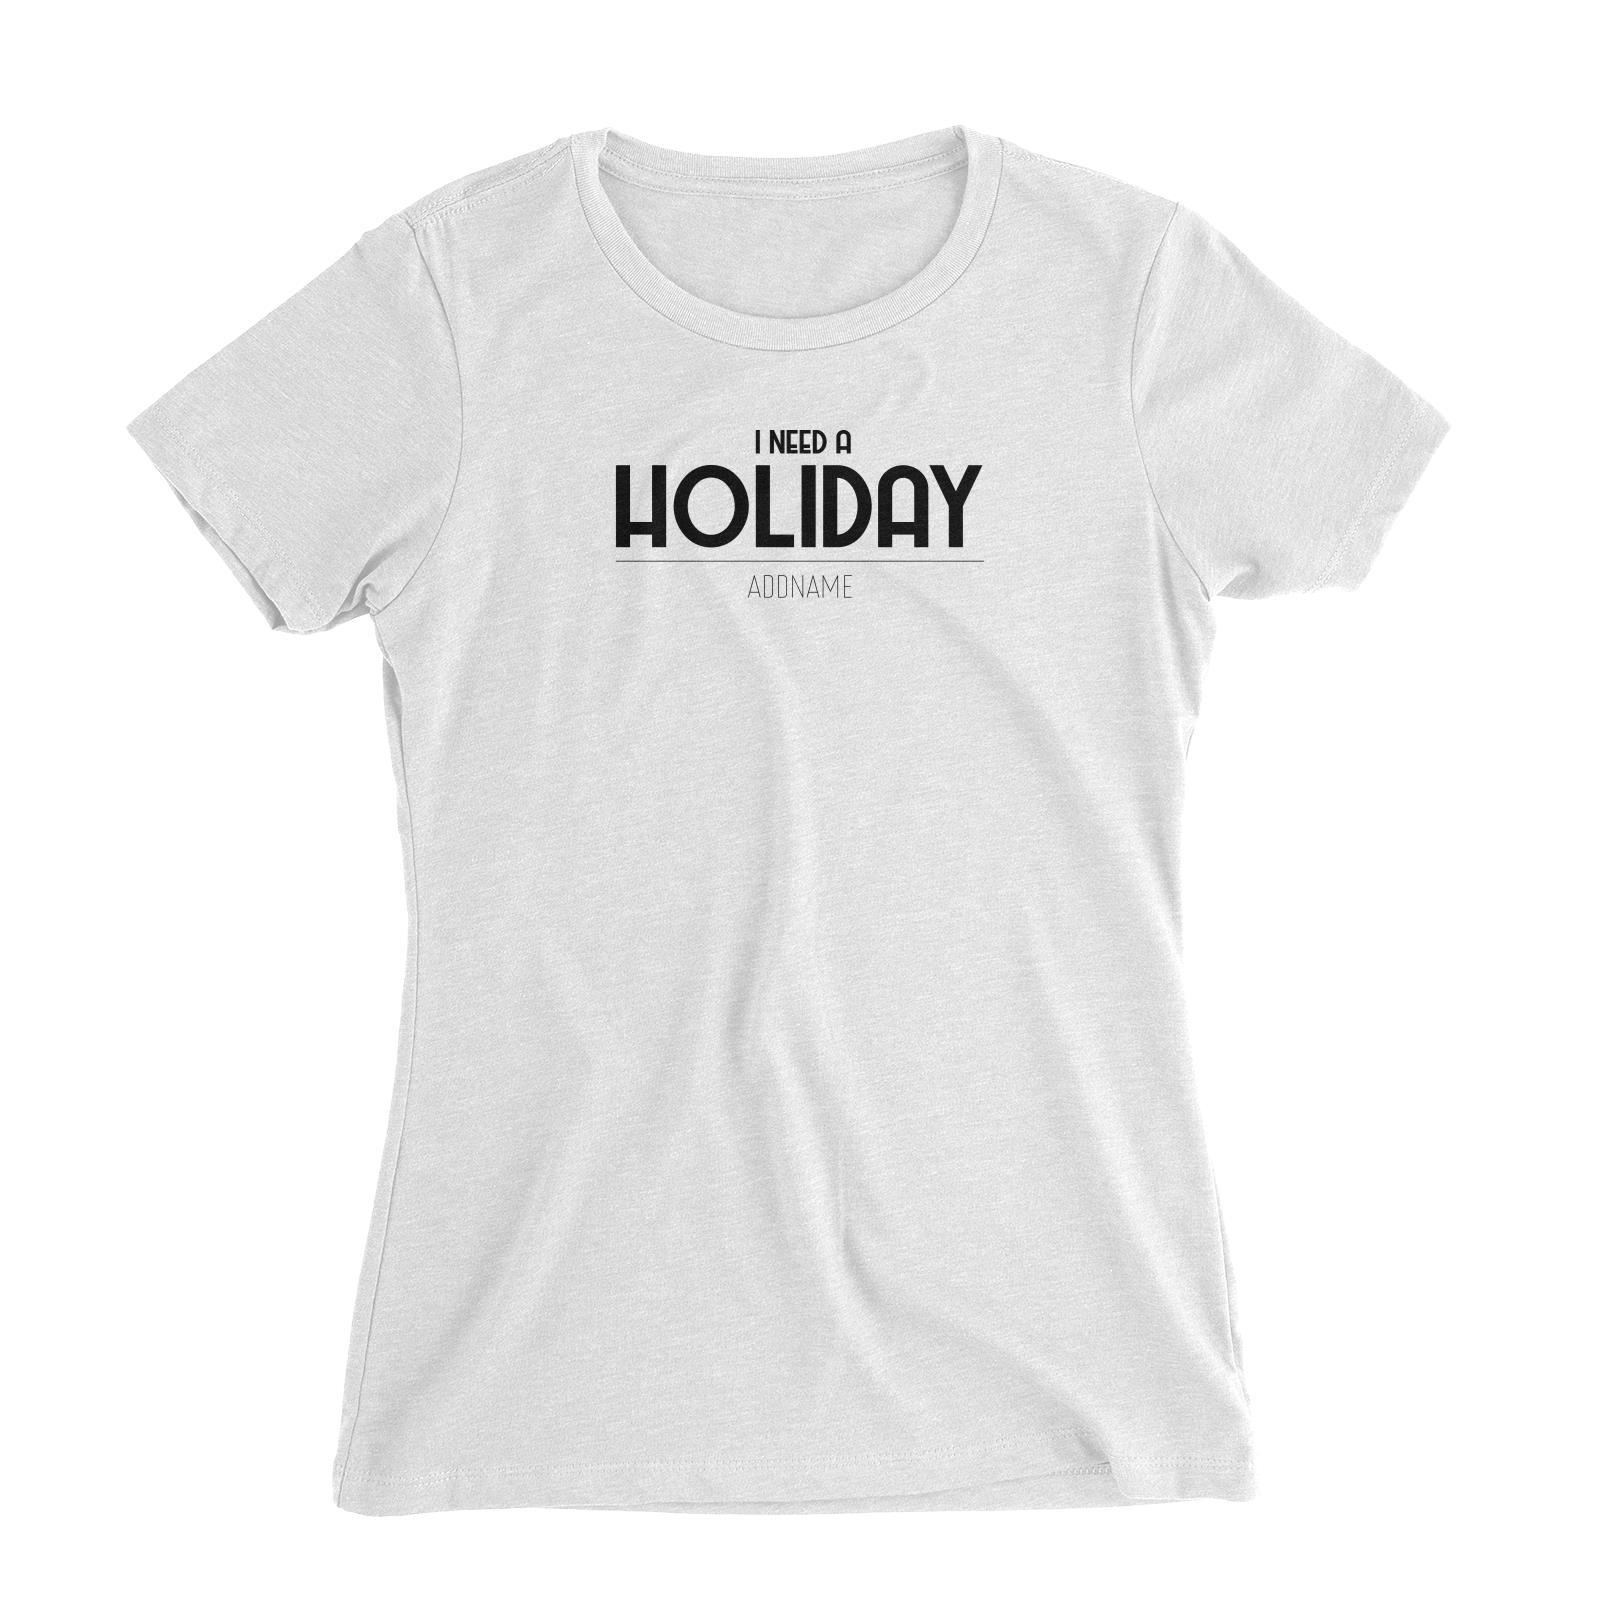 I Need A Holiday Women's Slim Fit T-Shirt